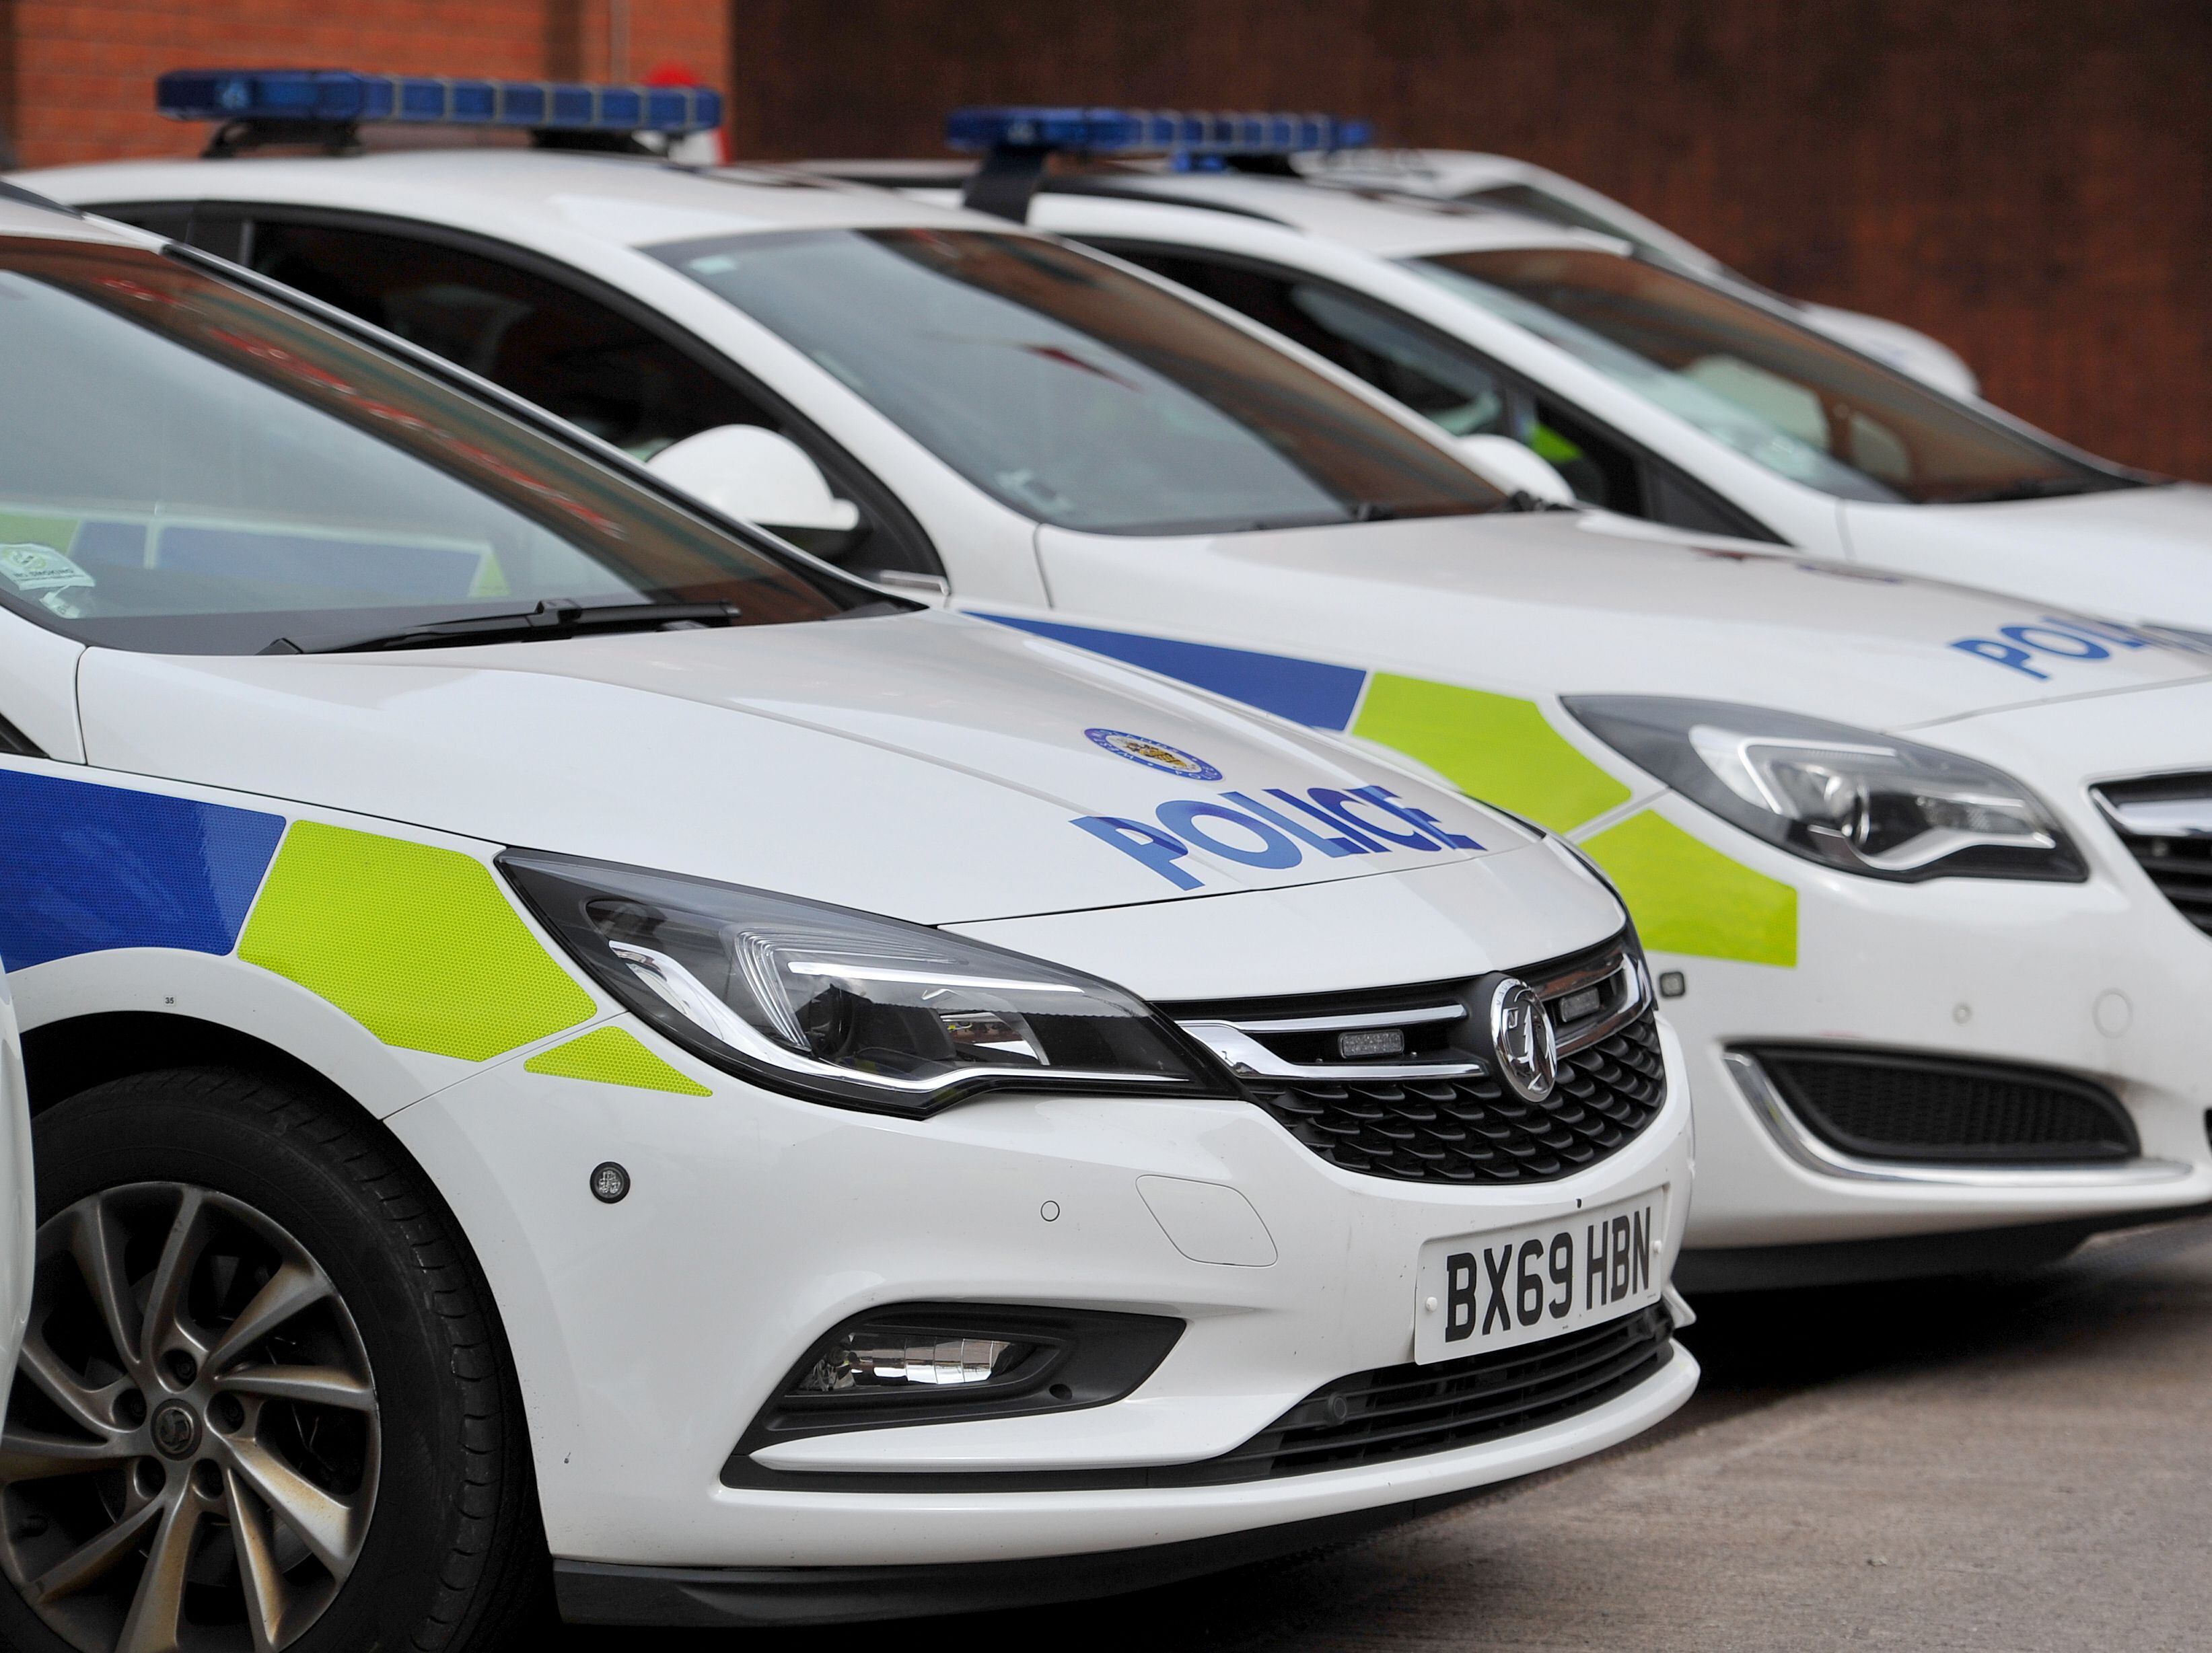 16-year-old boy arrested in connection with car key burglary in Sandwell